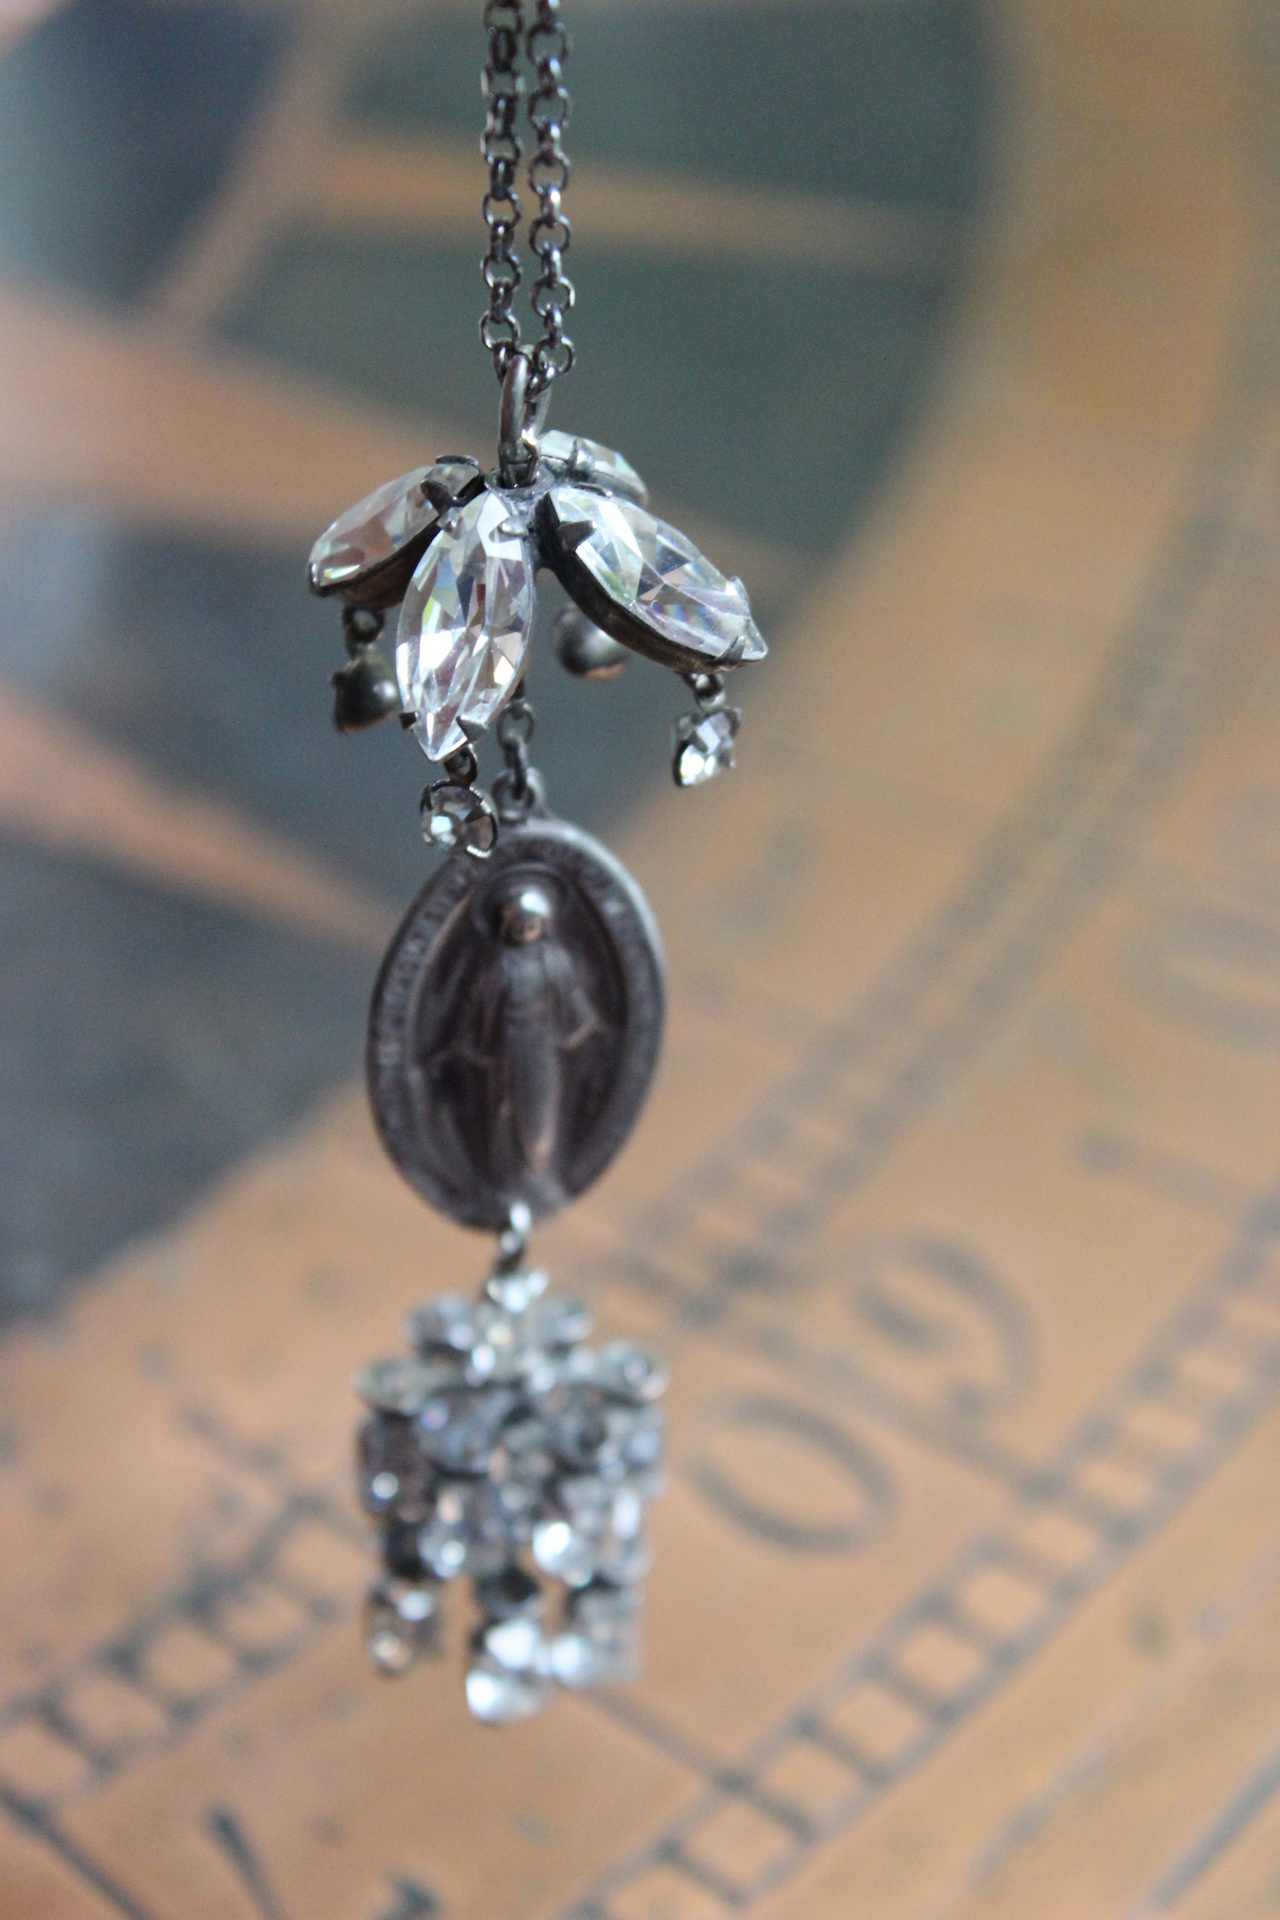 Antique Marian Necklace & Earrings with Amazing Antique Rhinestone Drops,Antique Marian Medals, Sterling Chain & Clasp